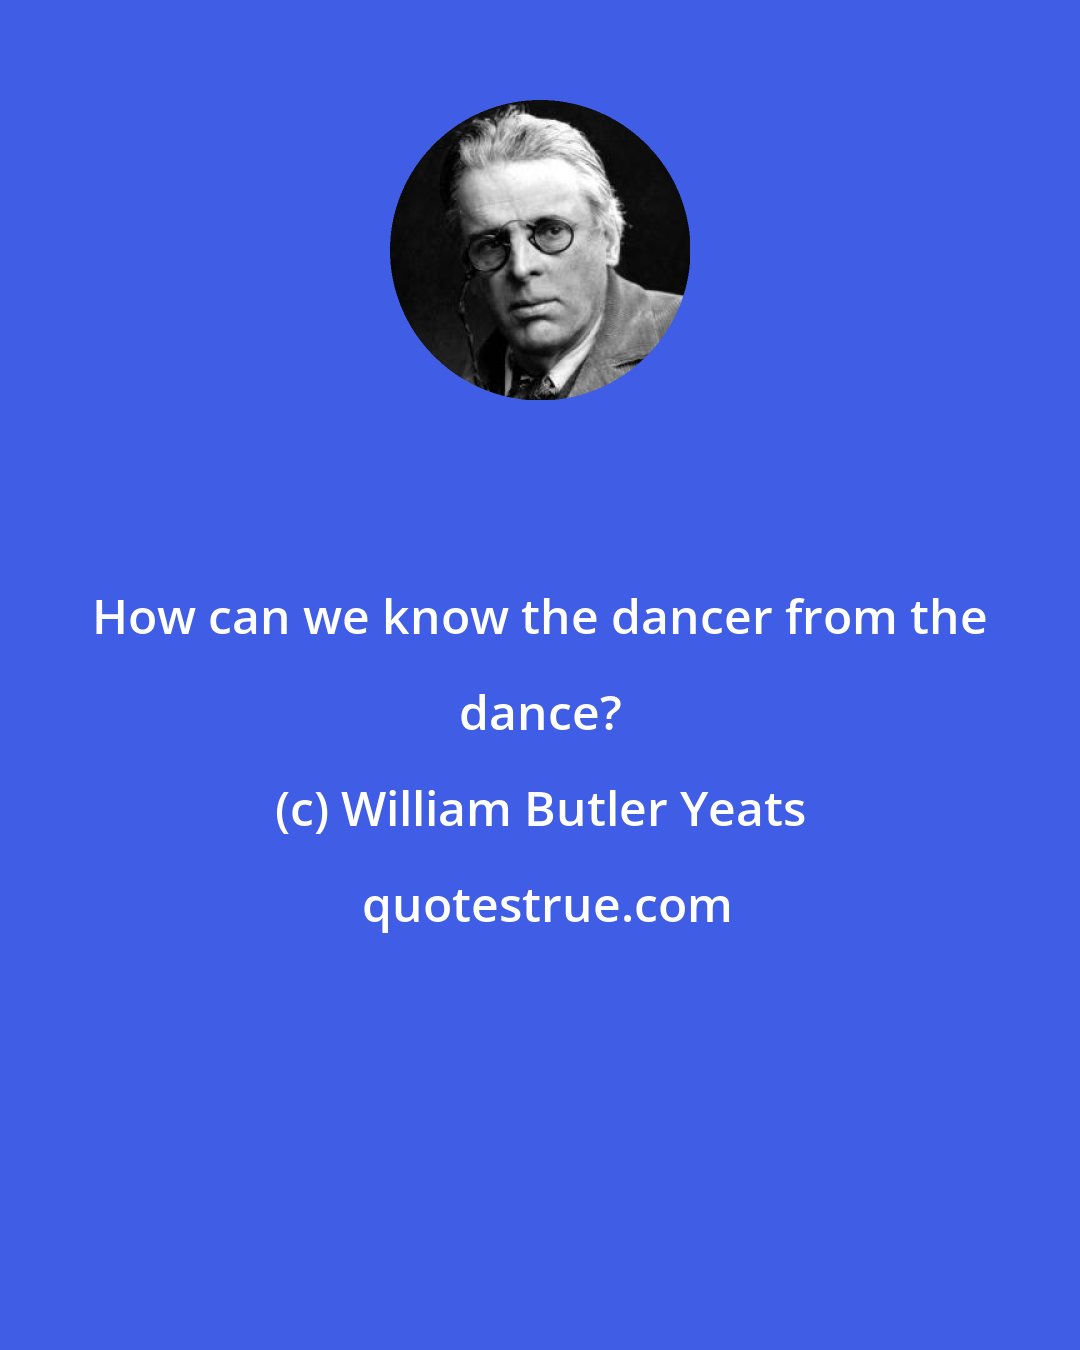 William Butler Yeats: How can we know the dancer from the dance?